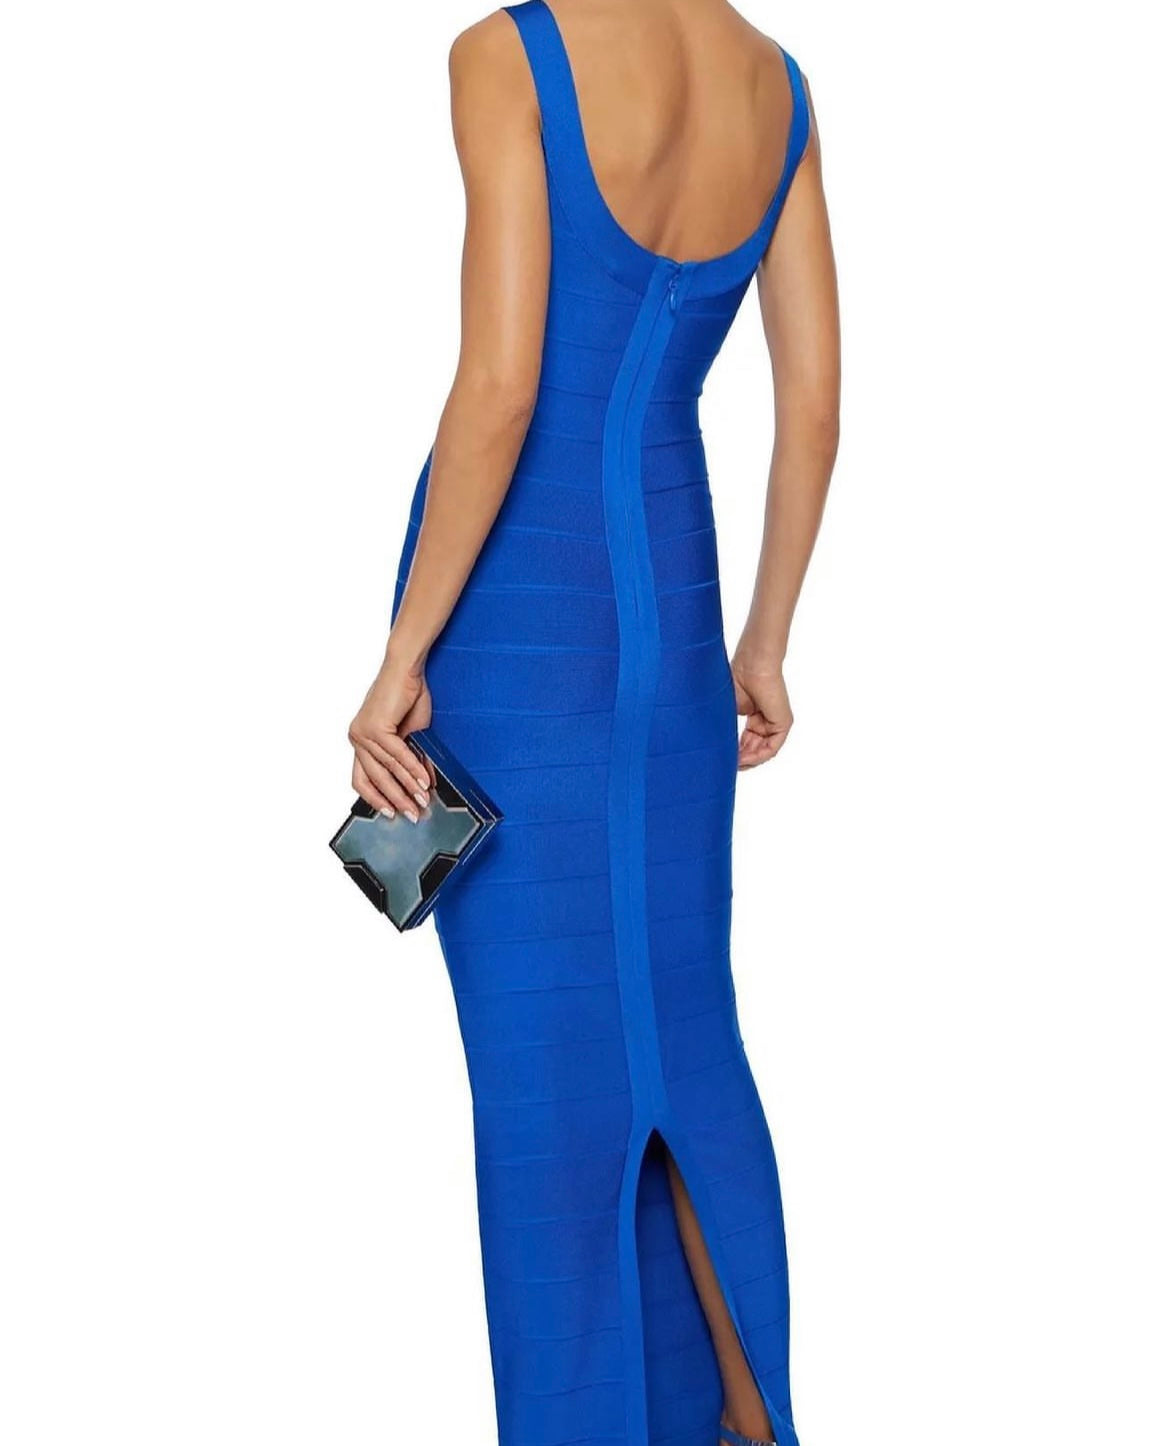 Bandage Gown Blue